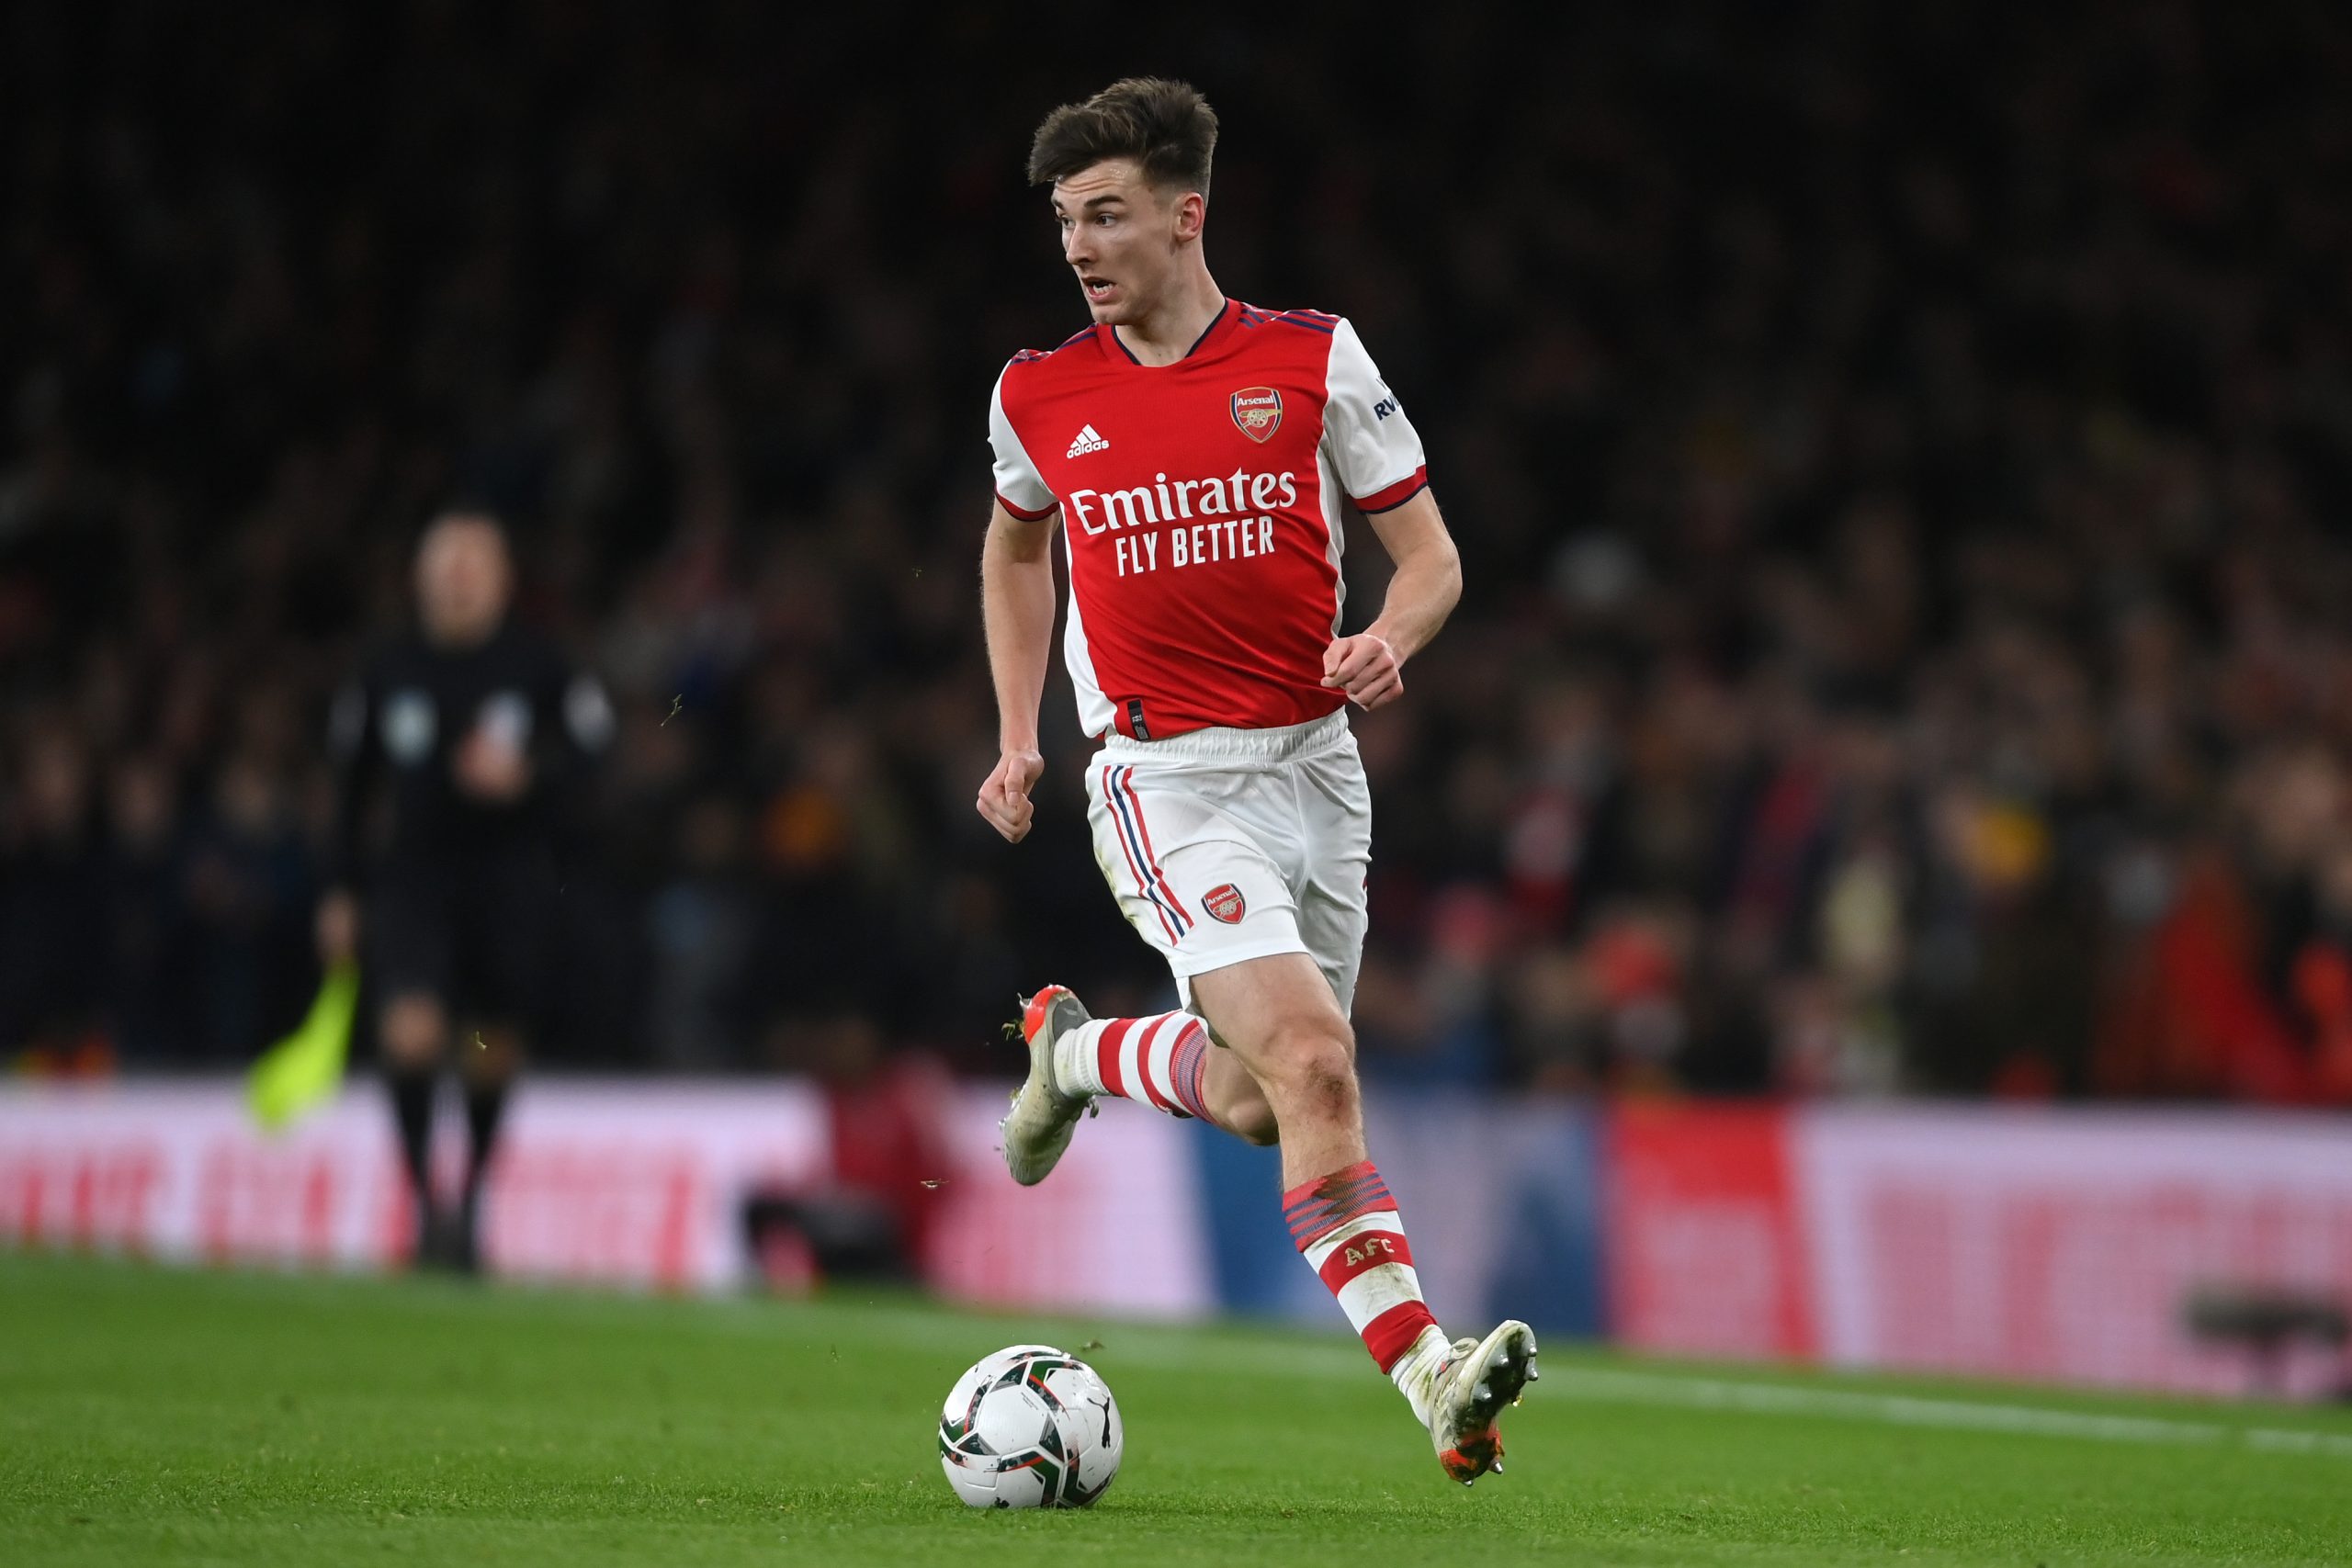 LONDON, ENGLAND - JANUARY 20: Kieran Tierney of Arsenal in ac tion during the Carabao Cup Semi Final Second Leg match between Arsenal and Liverpool at Emirates Stadium on January 20, 2022 in London, England. (Photo by Mike Hewitt/Getty Images)
The 4th Official uses images provided by the following image agency: Getty Images (https://www.gettyimages.de/) and Imago Images (https://www.imago-images.de/).